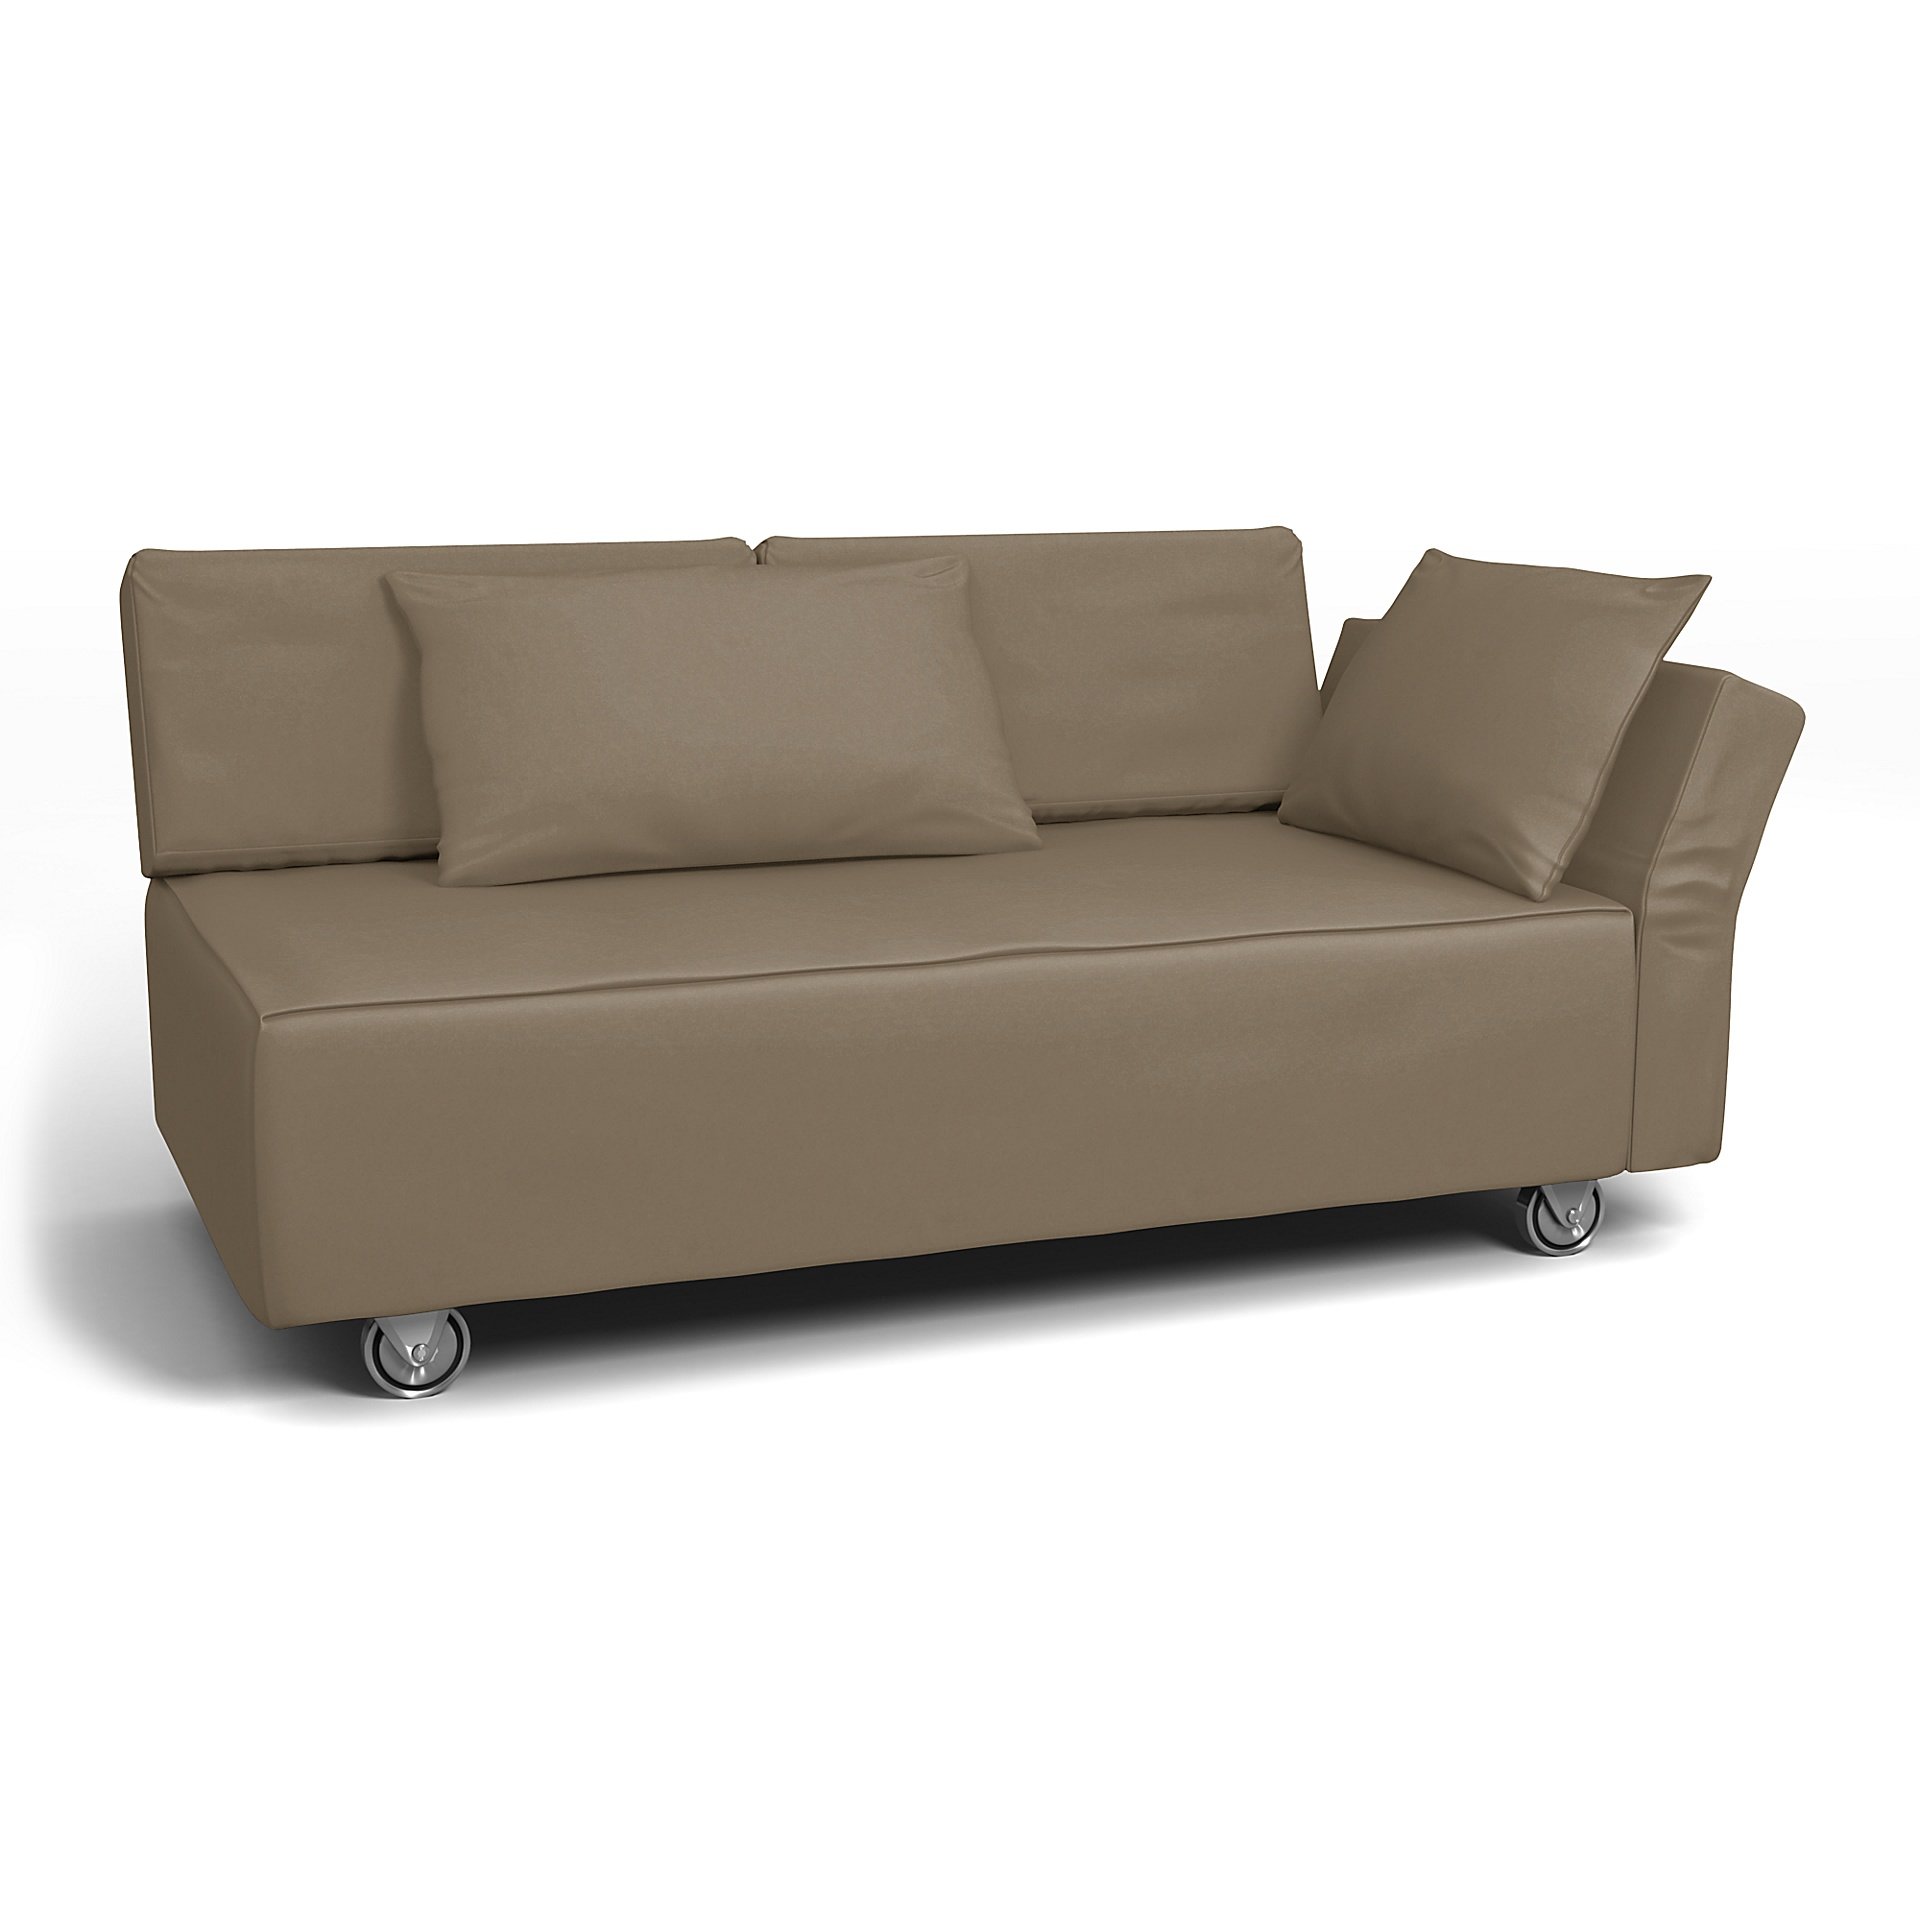 IKEA - Falsterbo 2 Seat Sofa with Right Arm Cover, Taupe, Velvet - Bemz